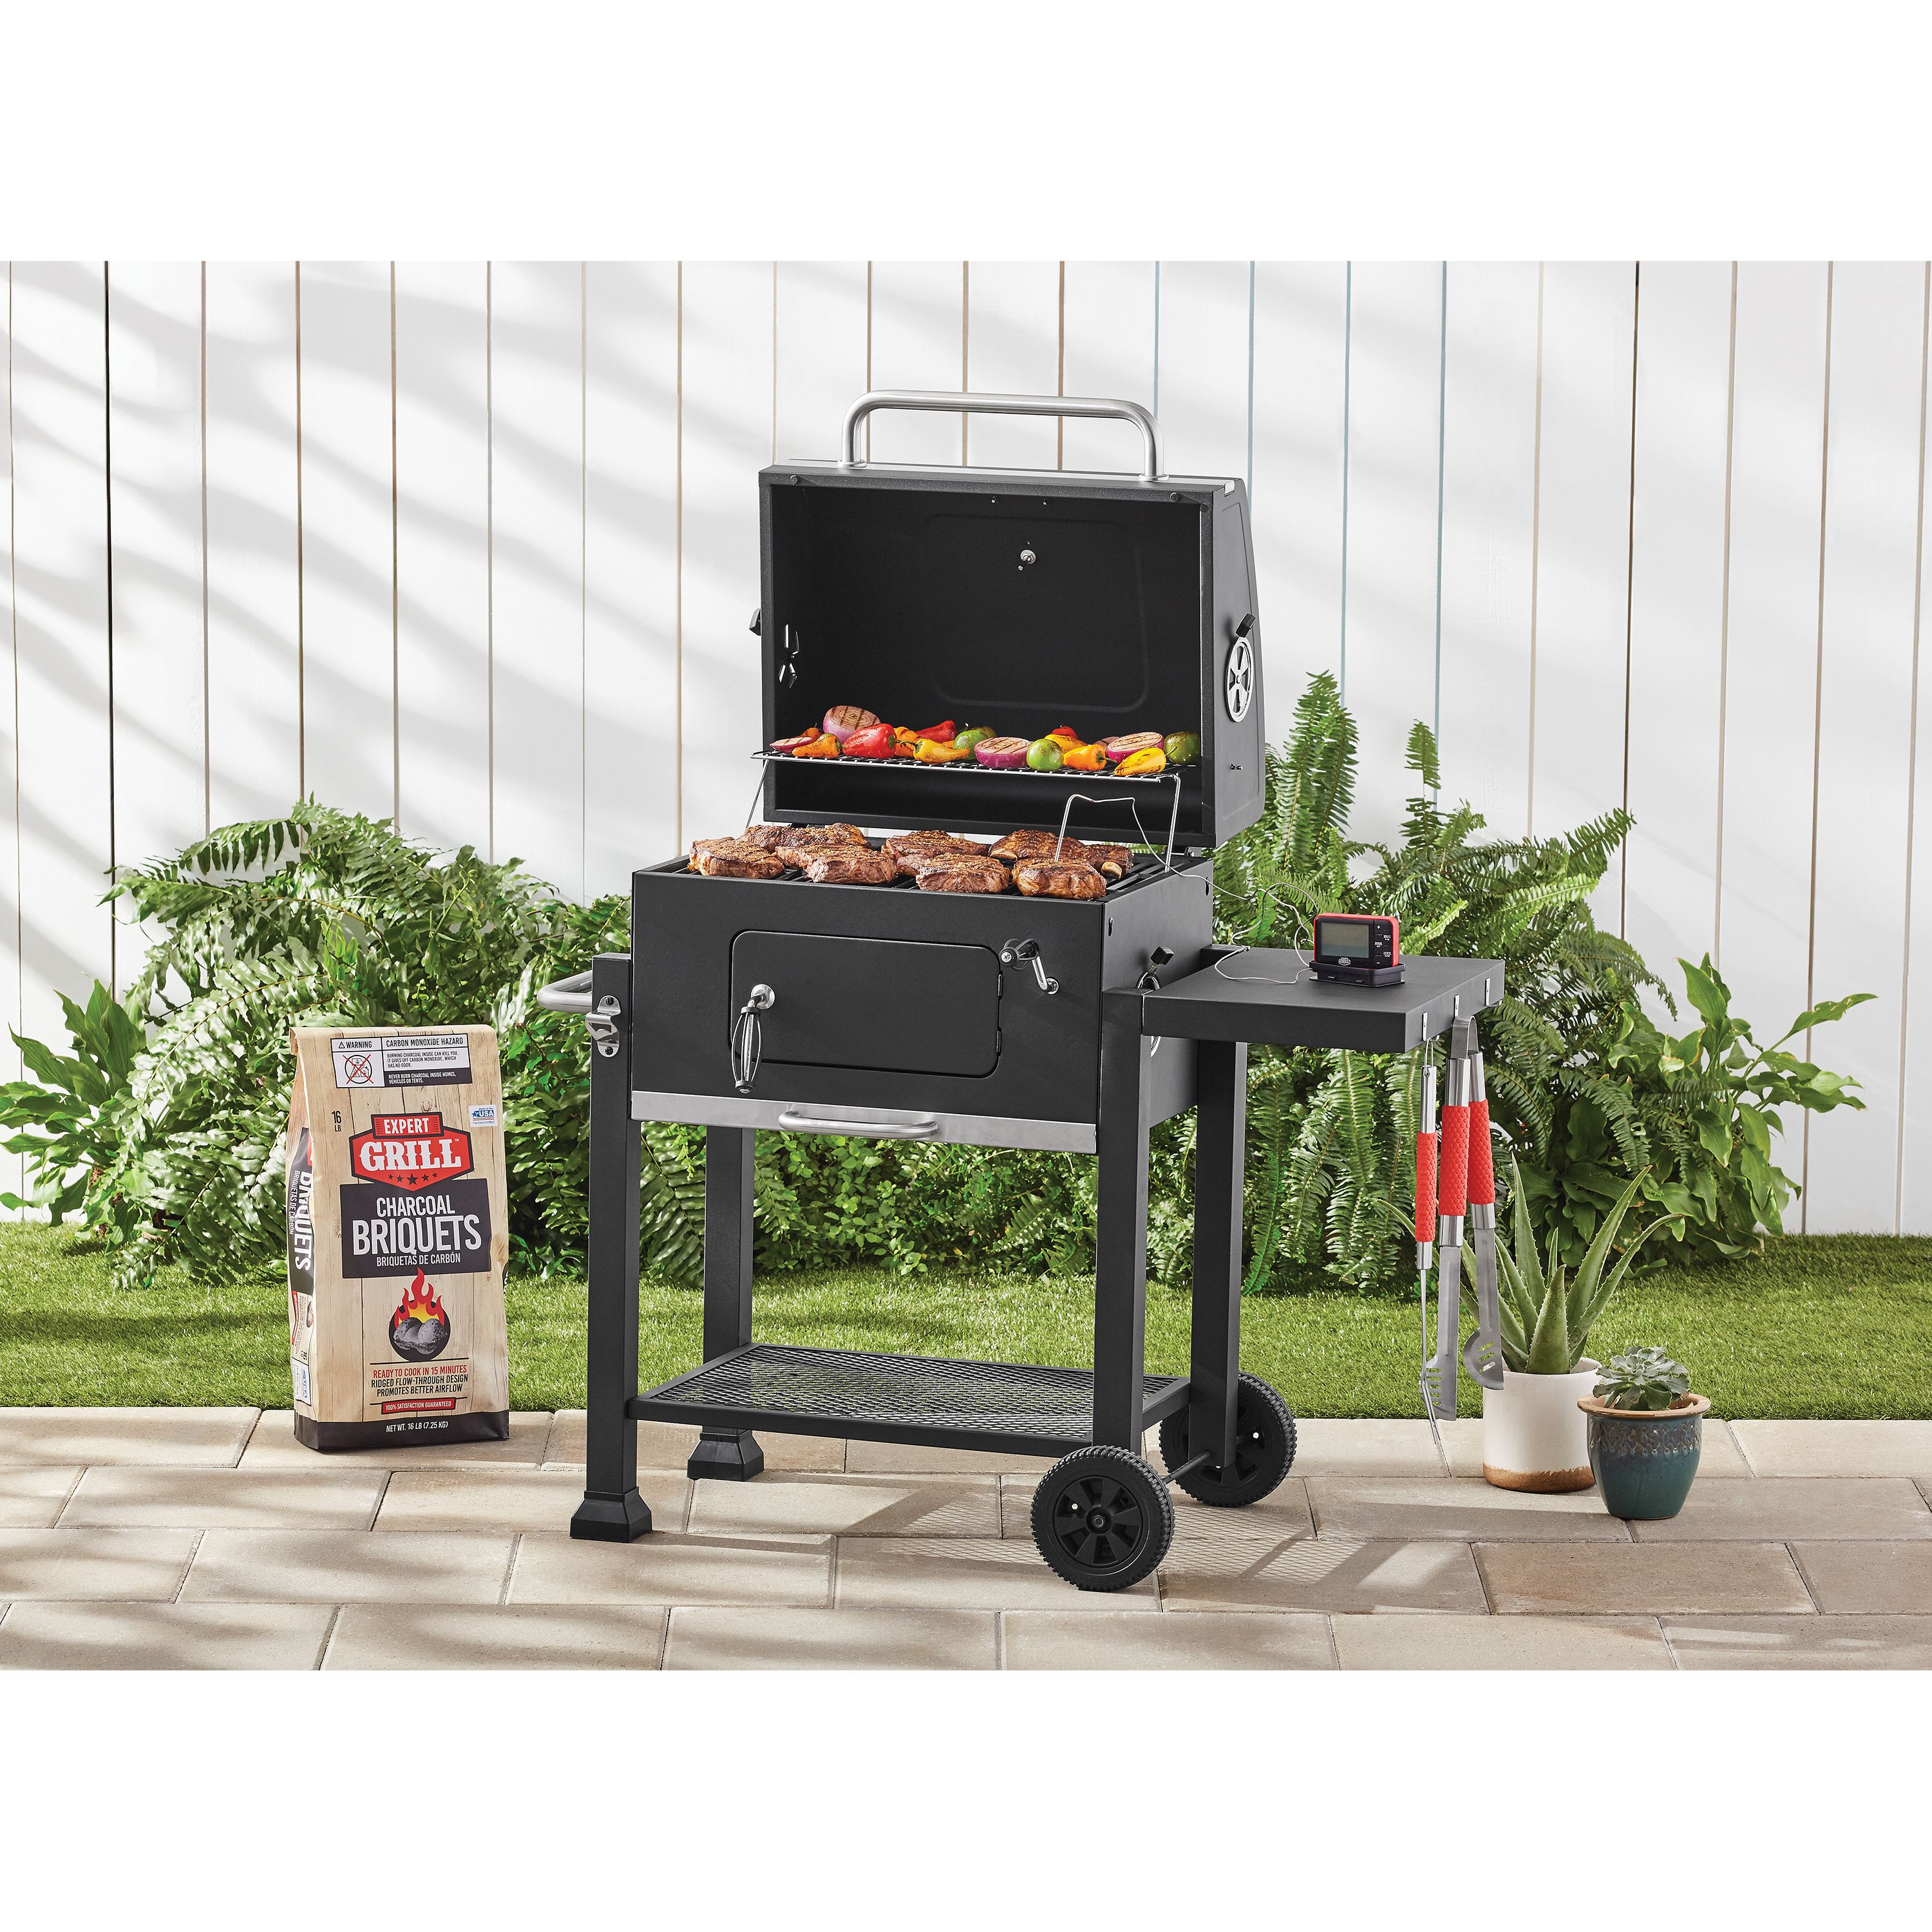 Expert Grill Heavy Duty 24-inch Charcoal Grill, Black - image 5 of 13